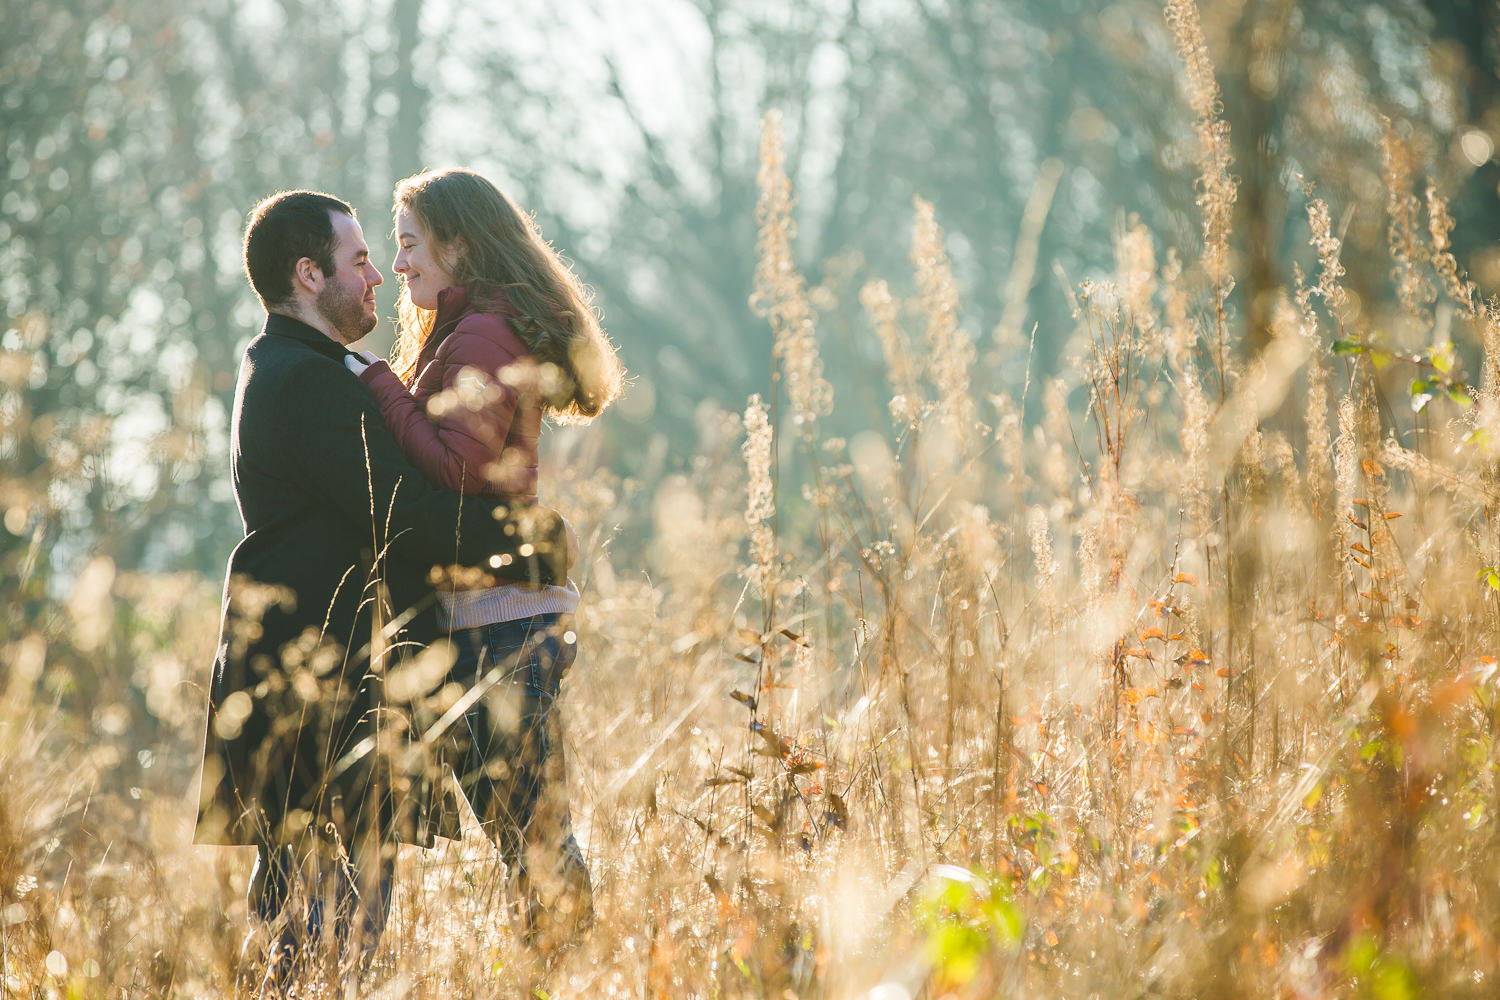 Winter engagement photography of a couple in a field smiling at one another. with low sunlight shining through the trees and foliage